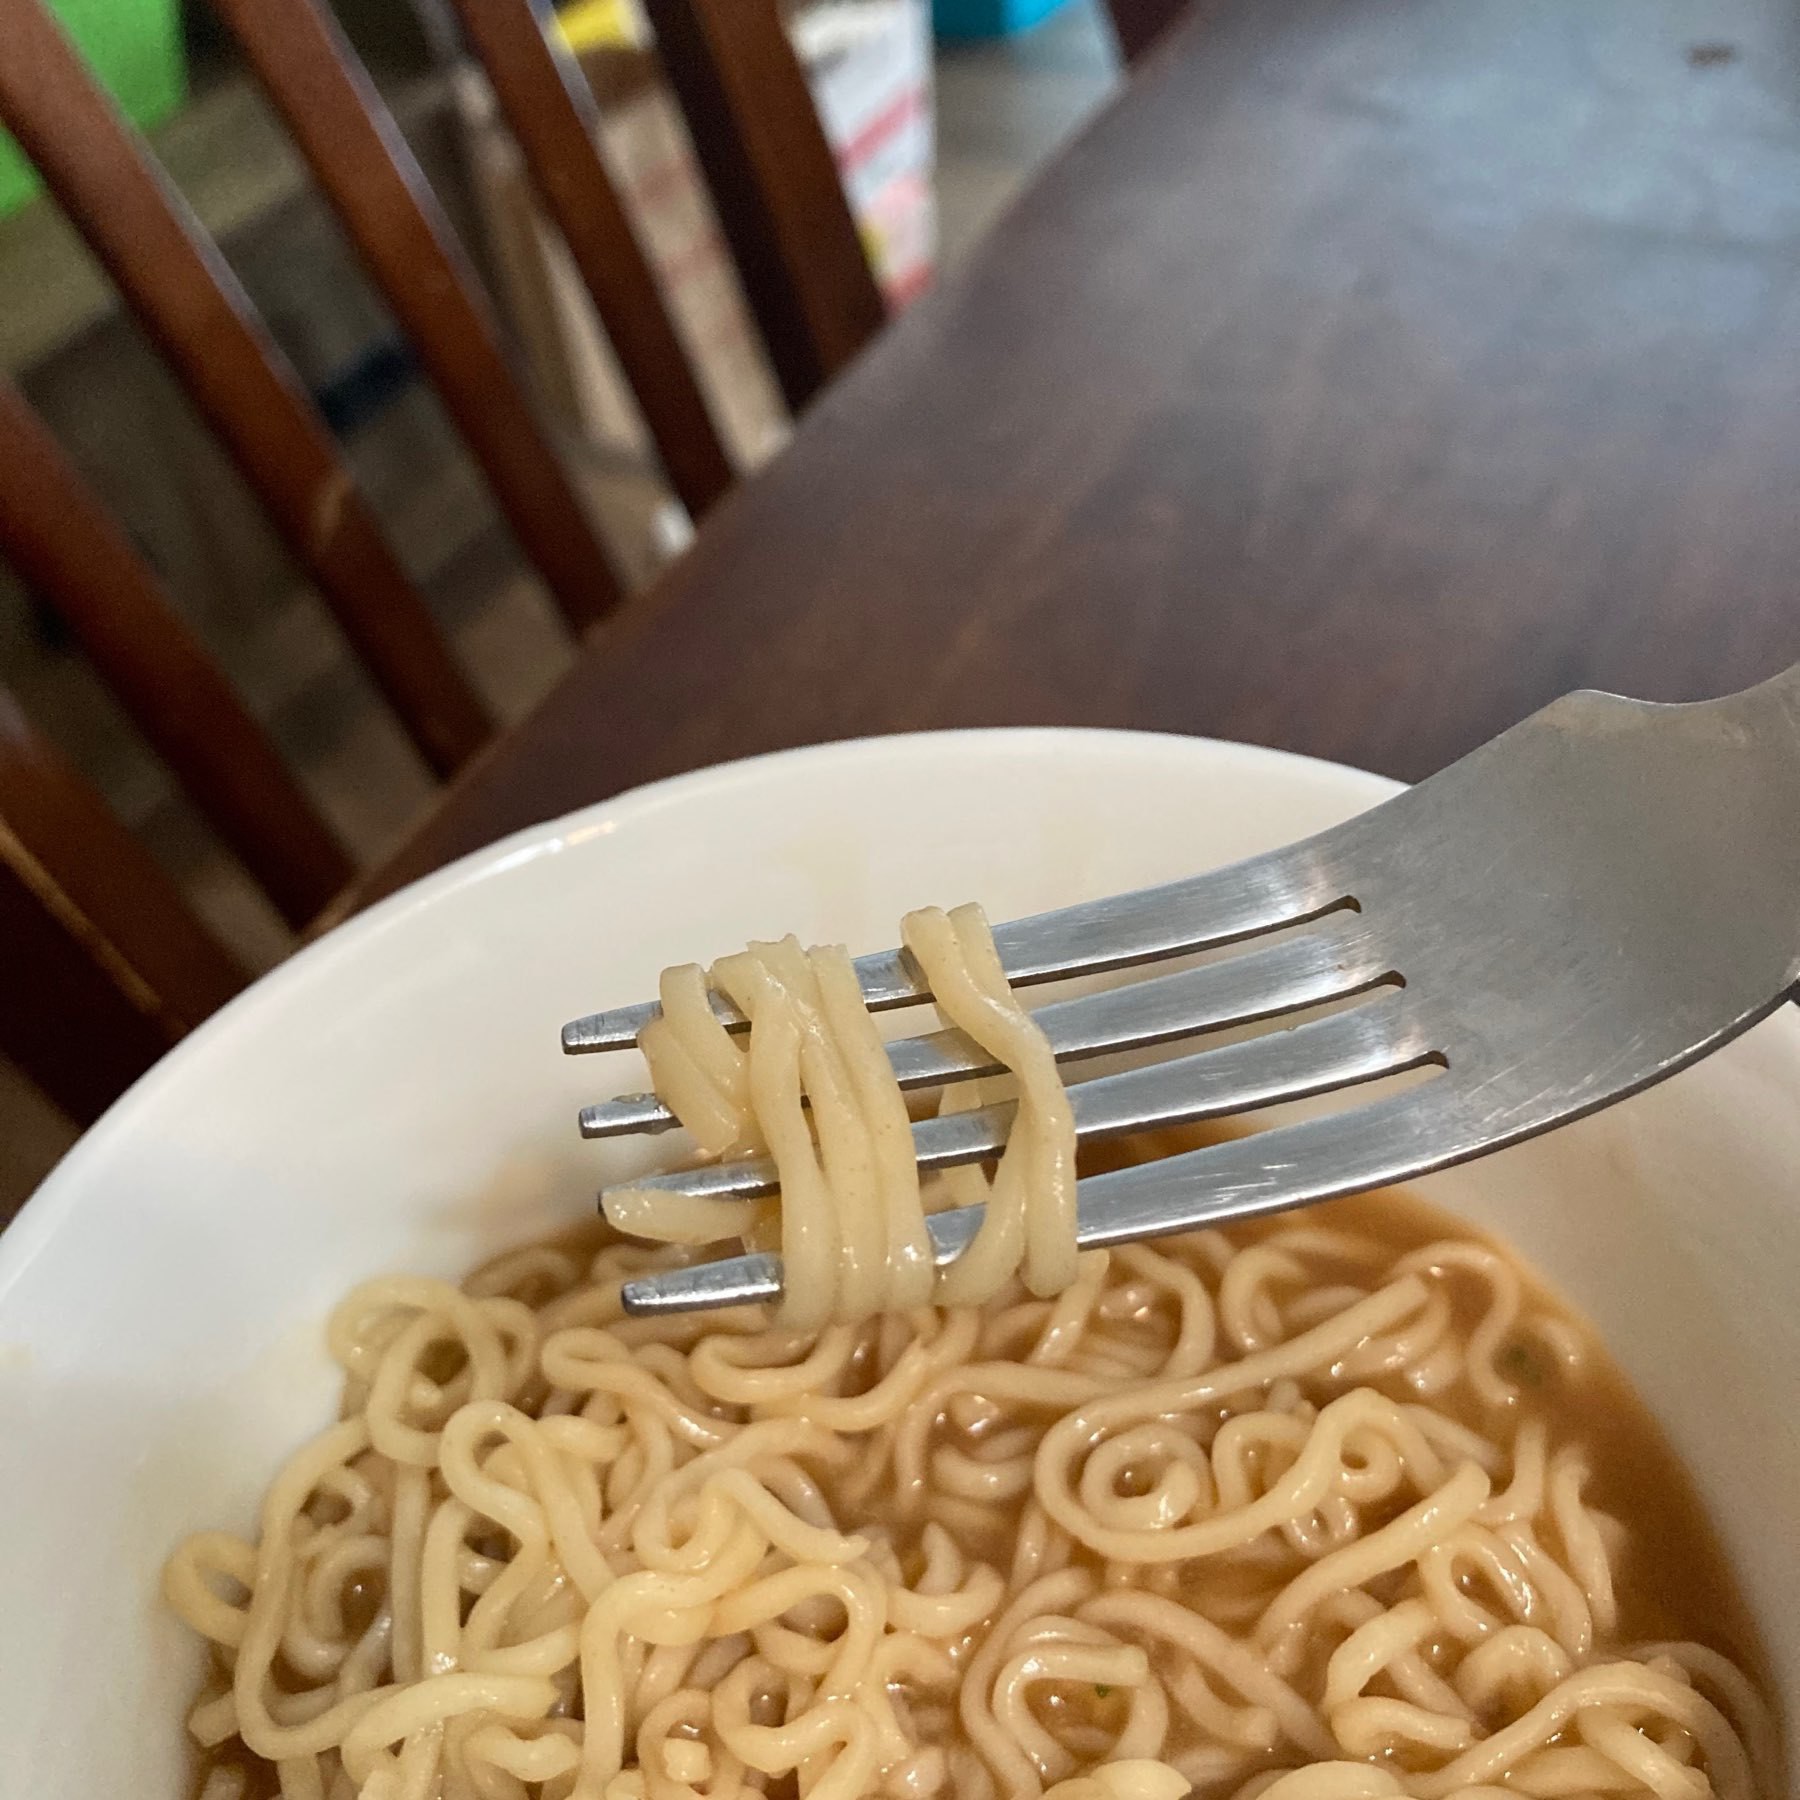 Top ramen one noodle at a time. 